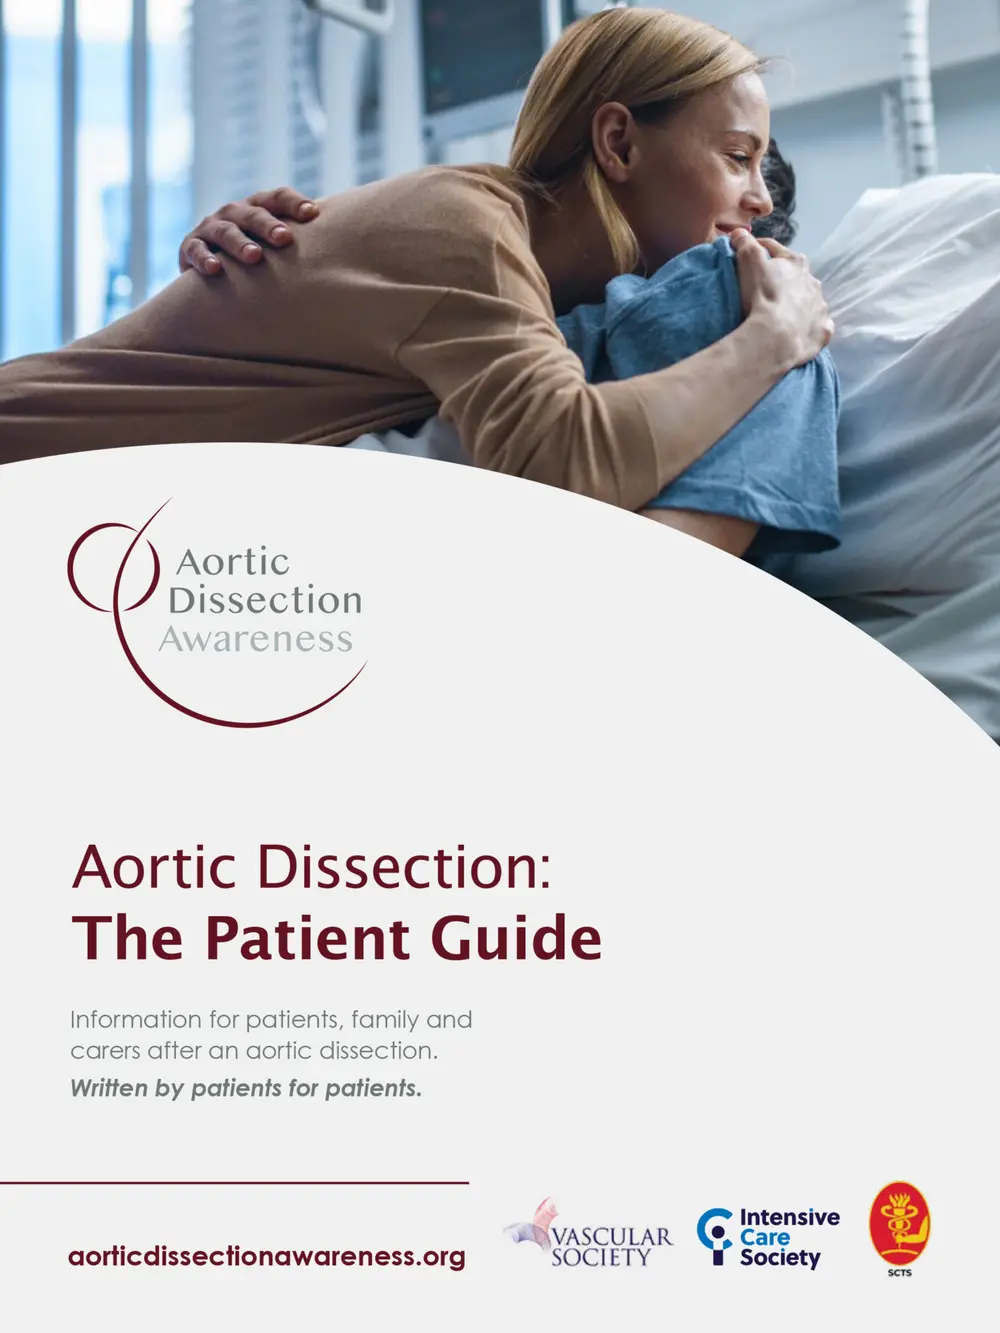 Aortic Dissection: The Patient Guide